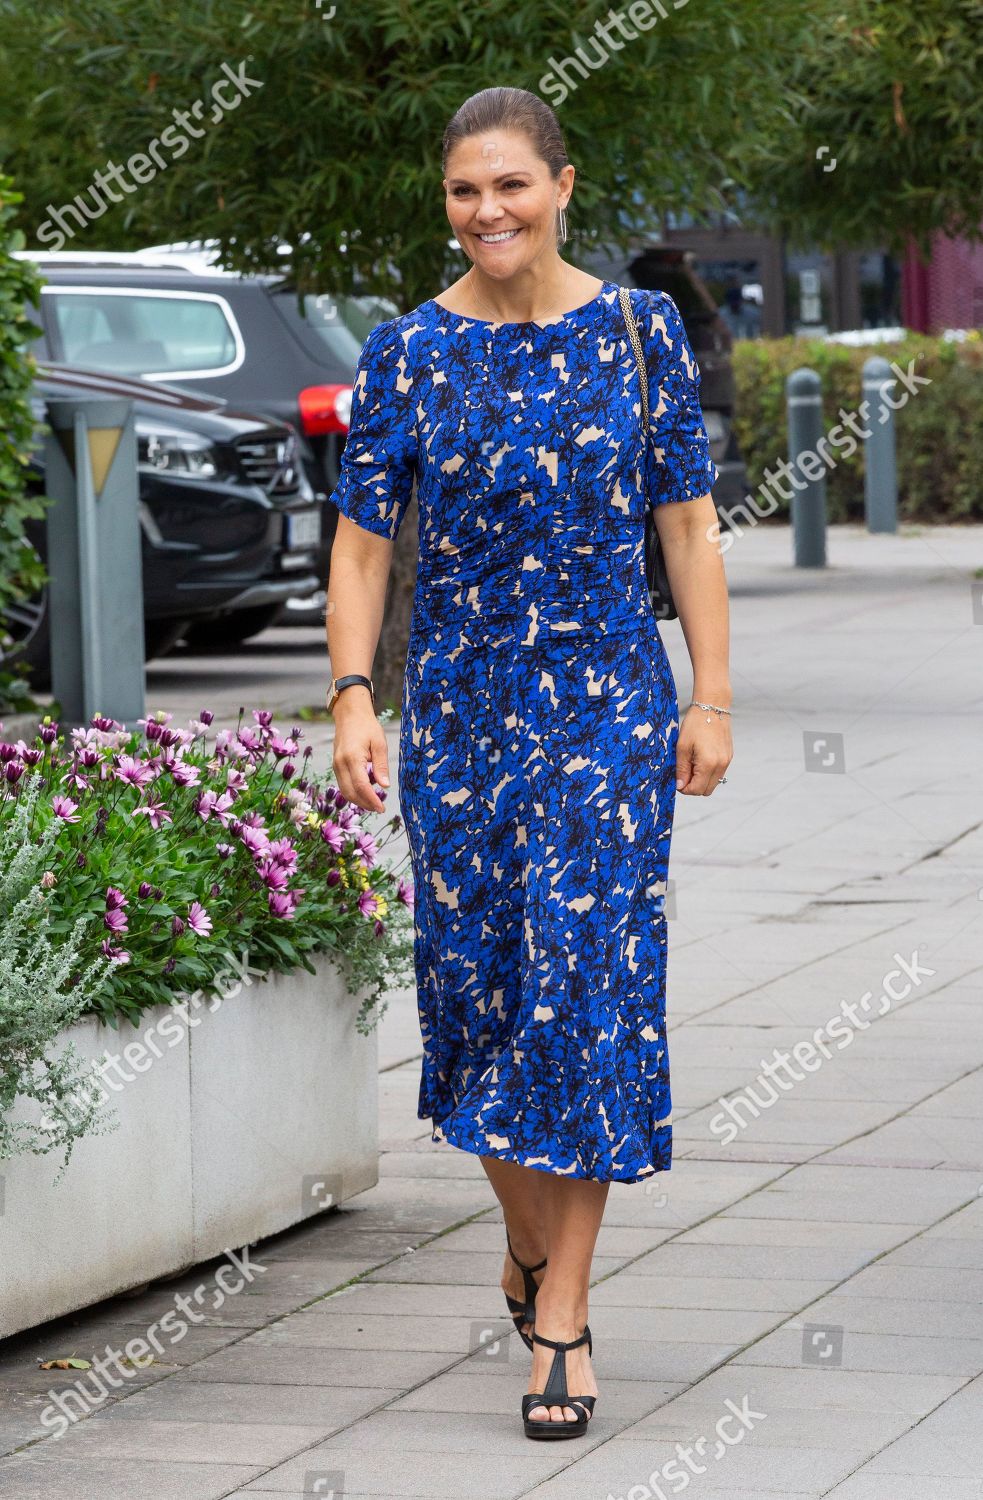 crown-princess-victoria-and-prince-daniel-visit-the-electrolux-company-stockholm-sweden-shutterstock-editorial-10384877a.jpg